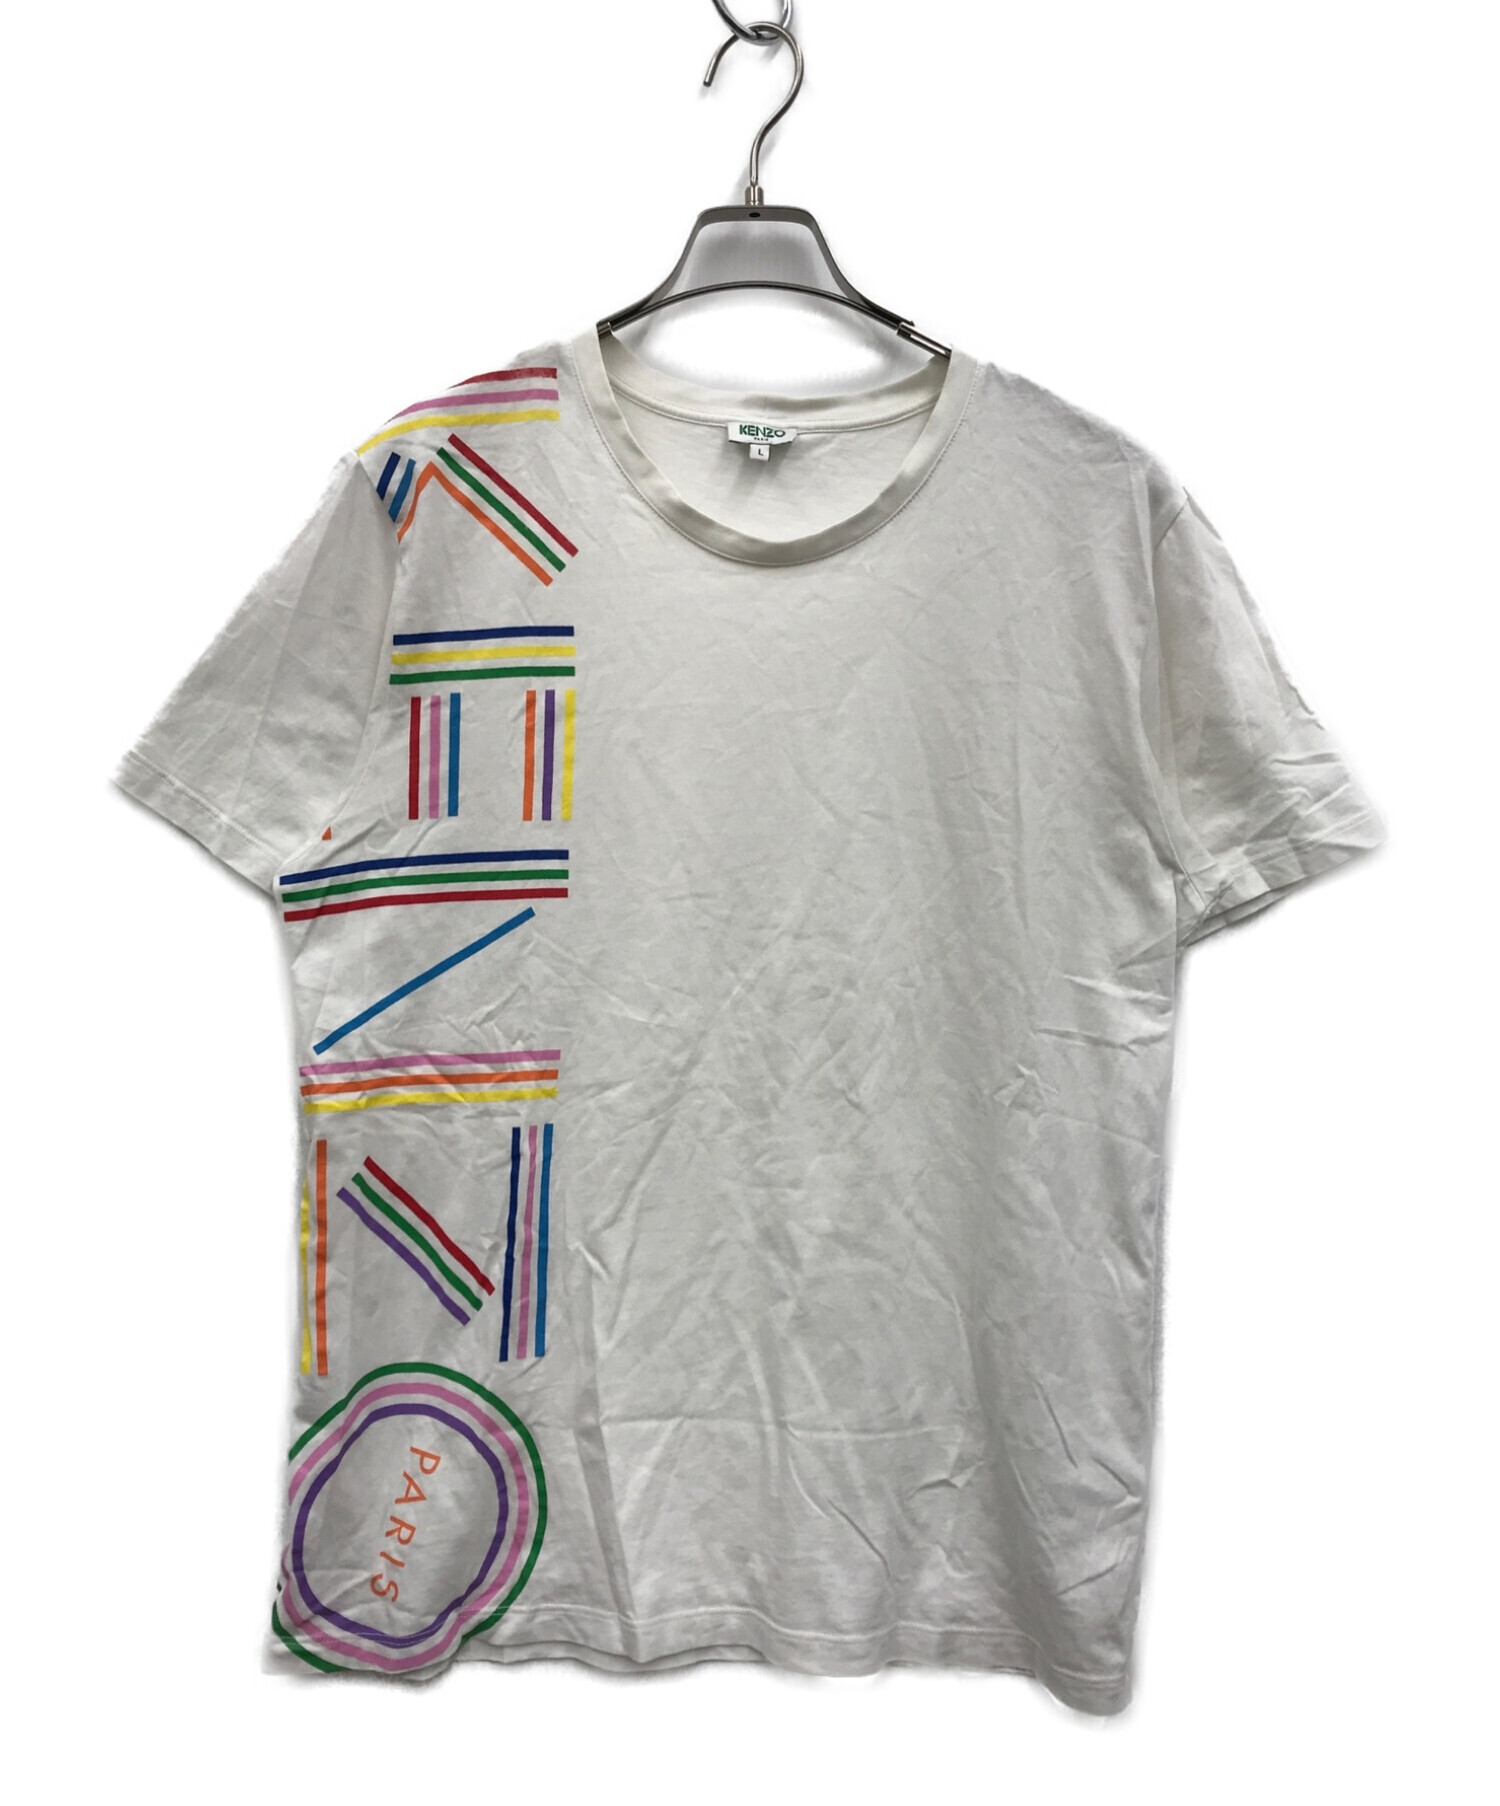 KENZO 23SS エレファントプリント Tシャツ カットソー 半袖 L 黒